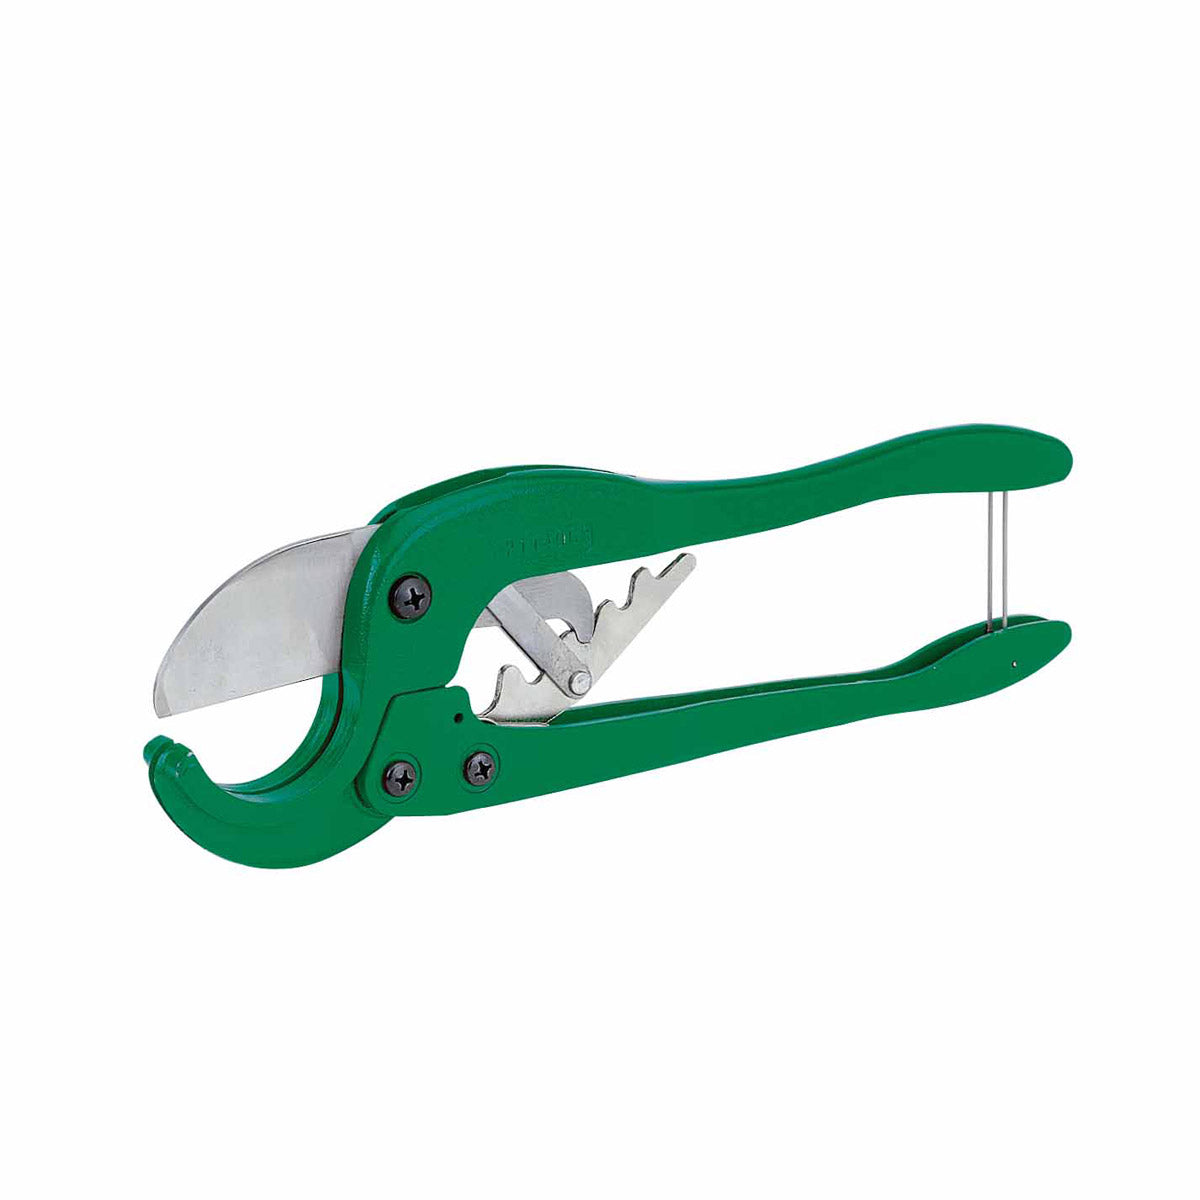 Greenlee 865 PVC Cutter For Up To 2"